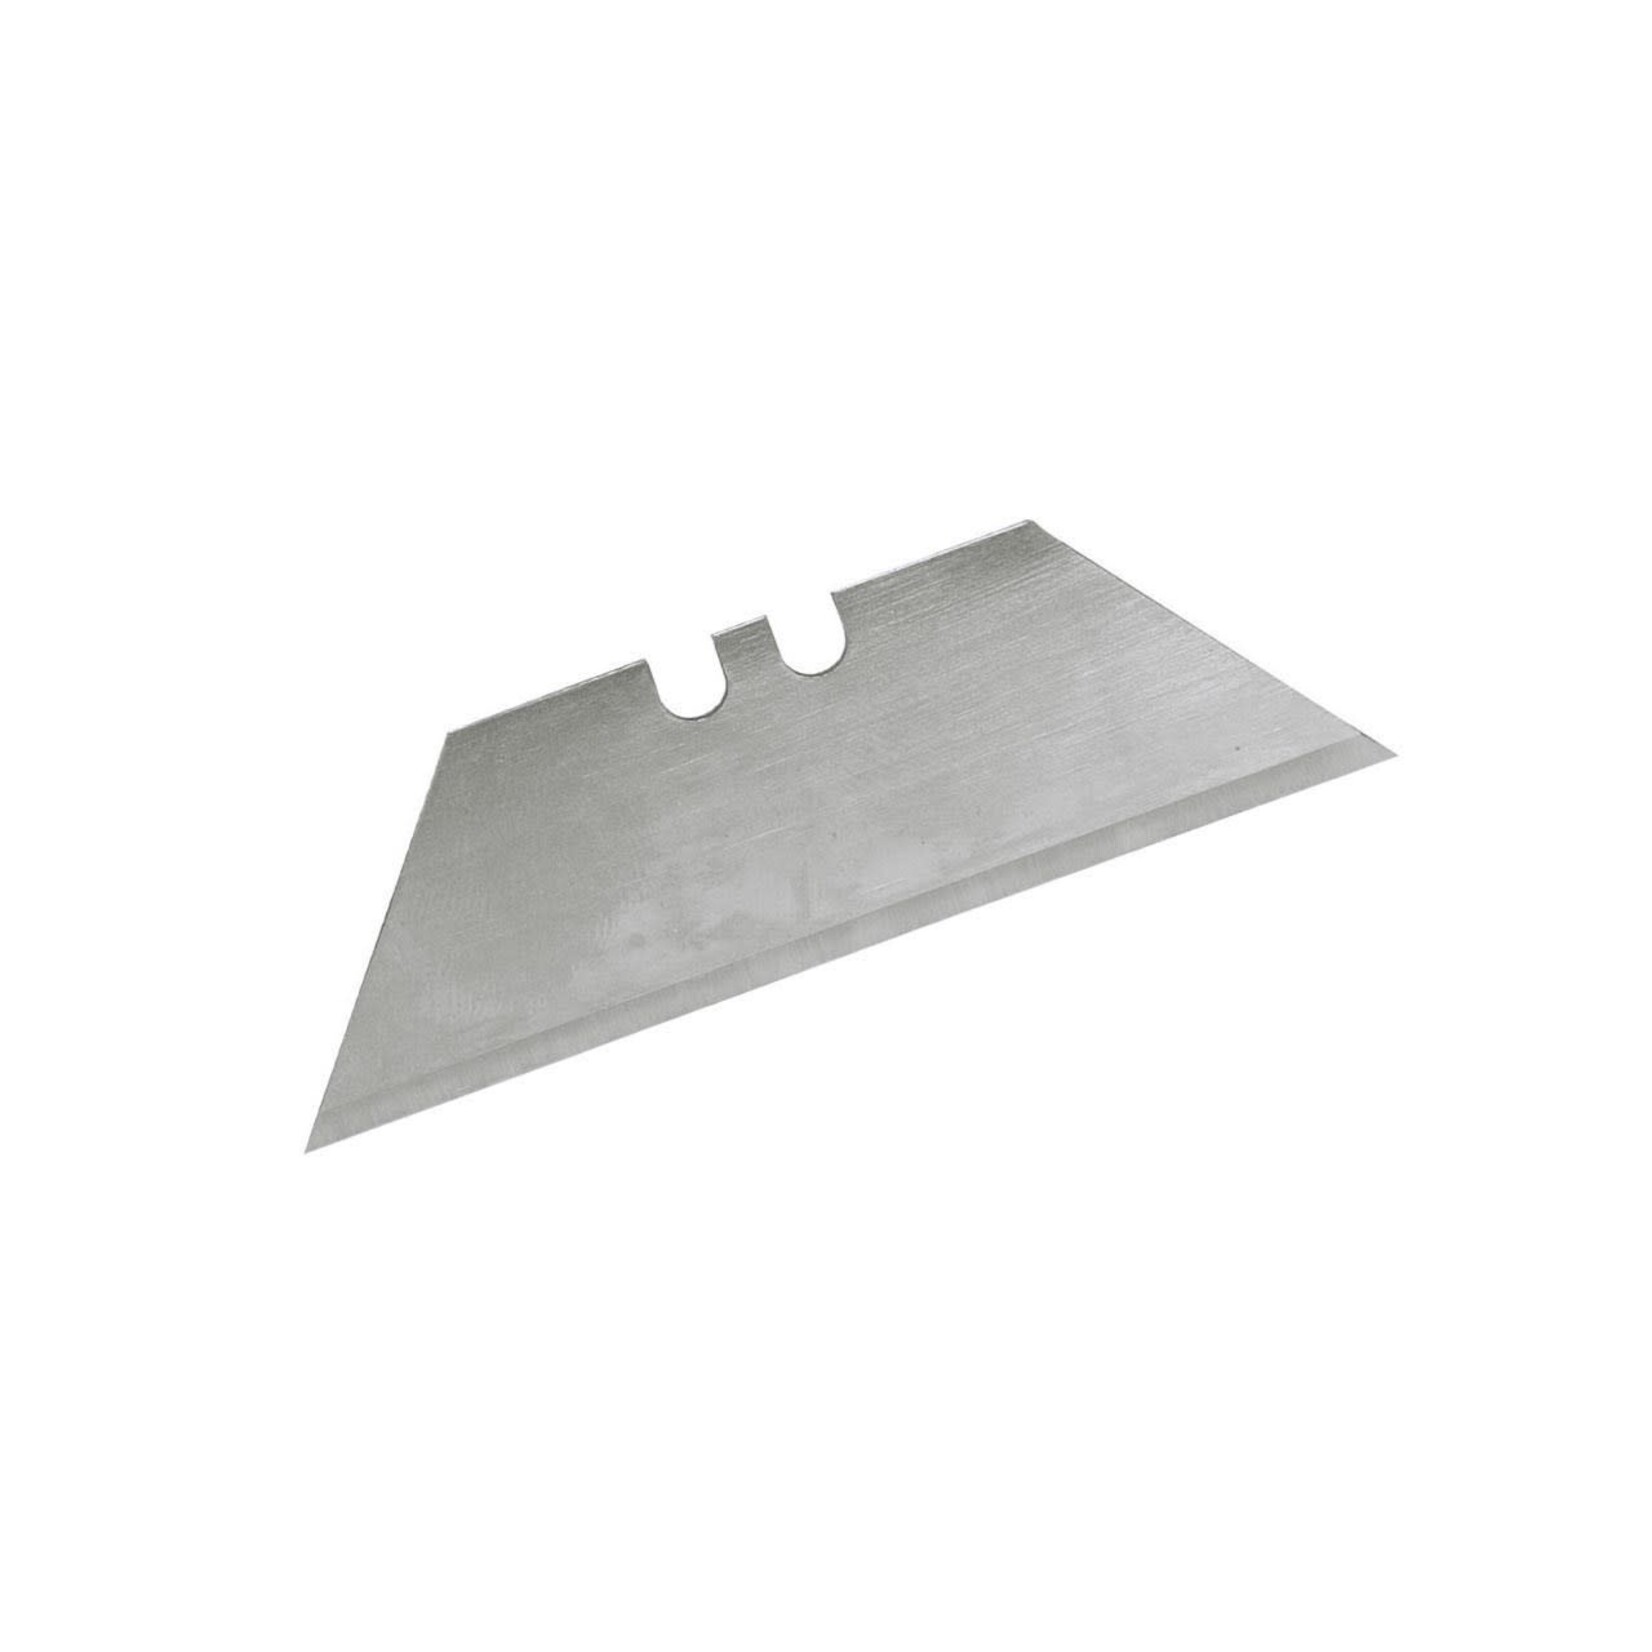 Dry It Center Utility Knife Blades Pack of 10